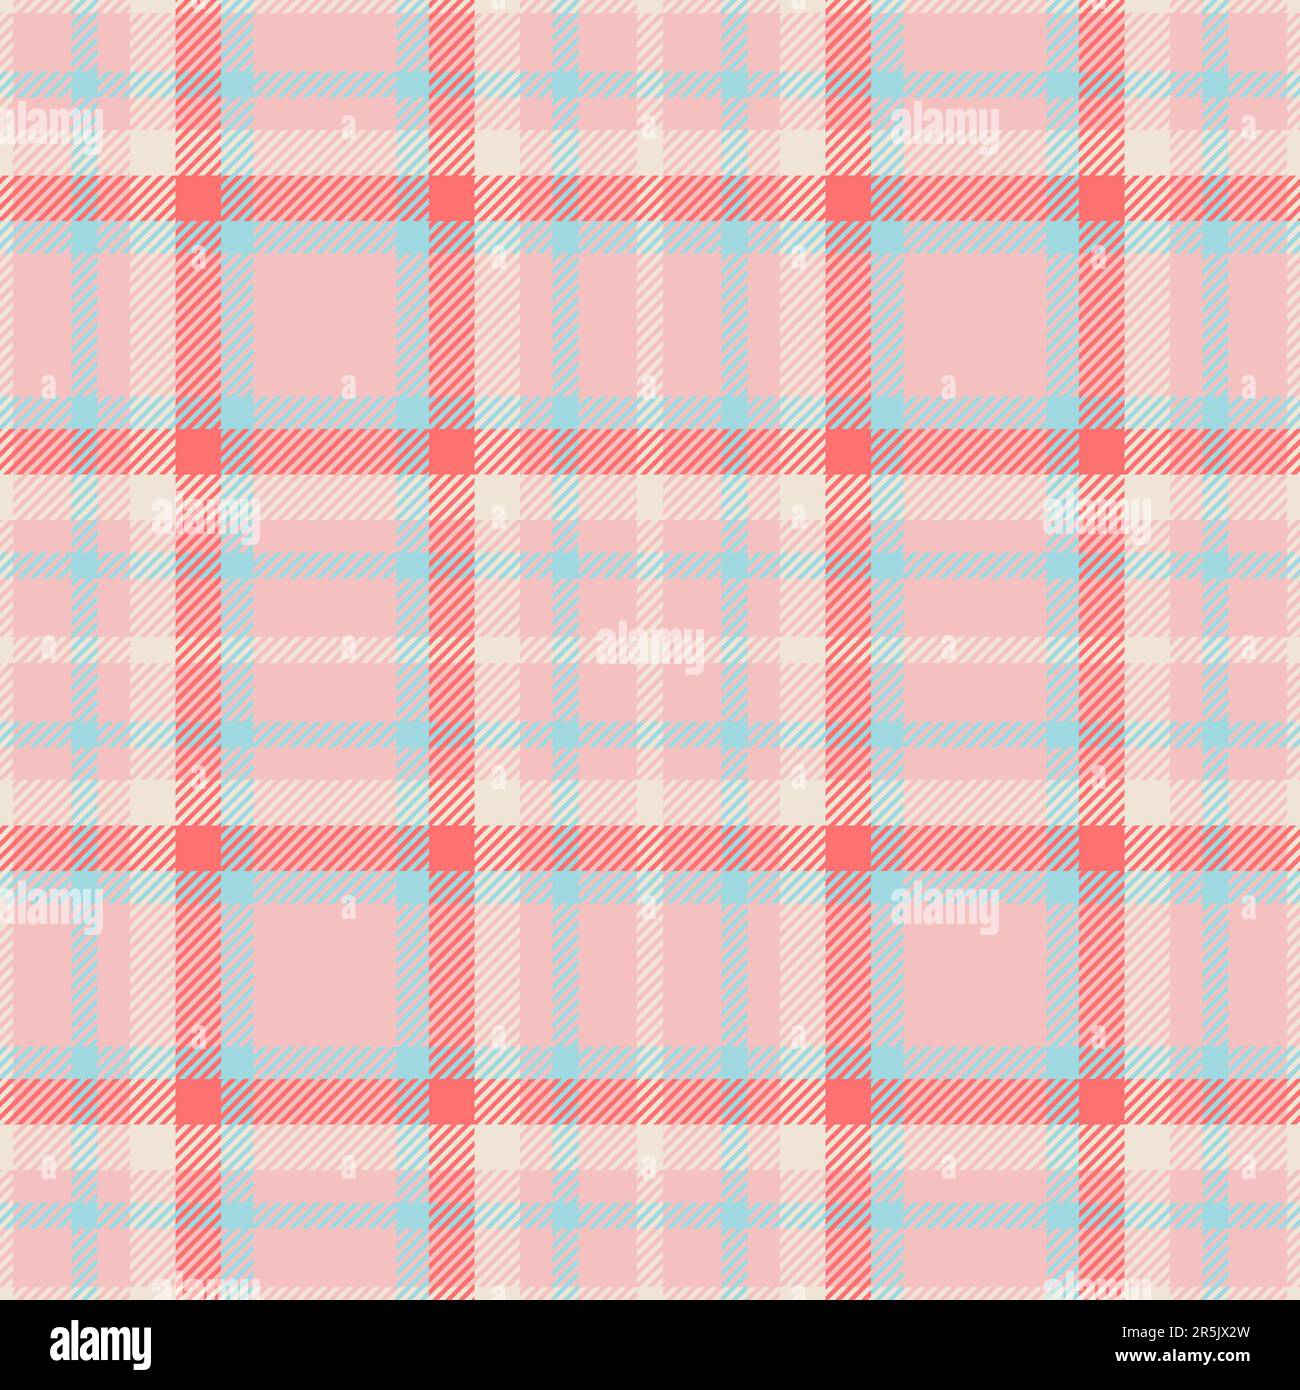 Tartan fabric vector of background plaid texture with a check textile pattern seamless in light and red colors. Stock Vector